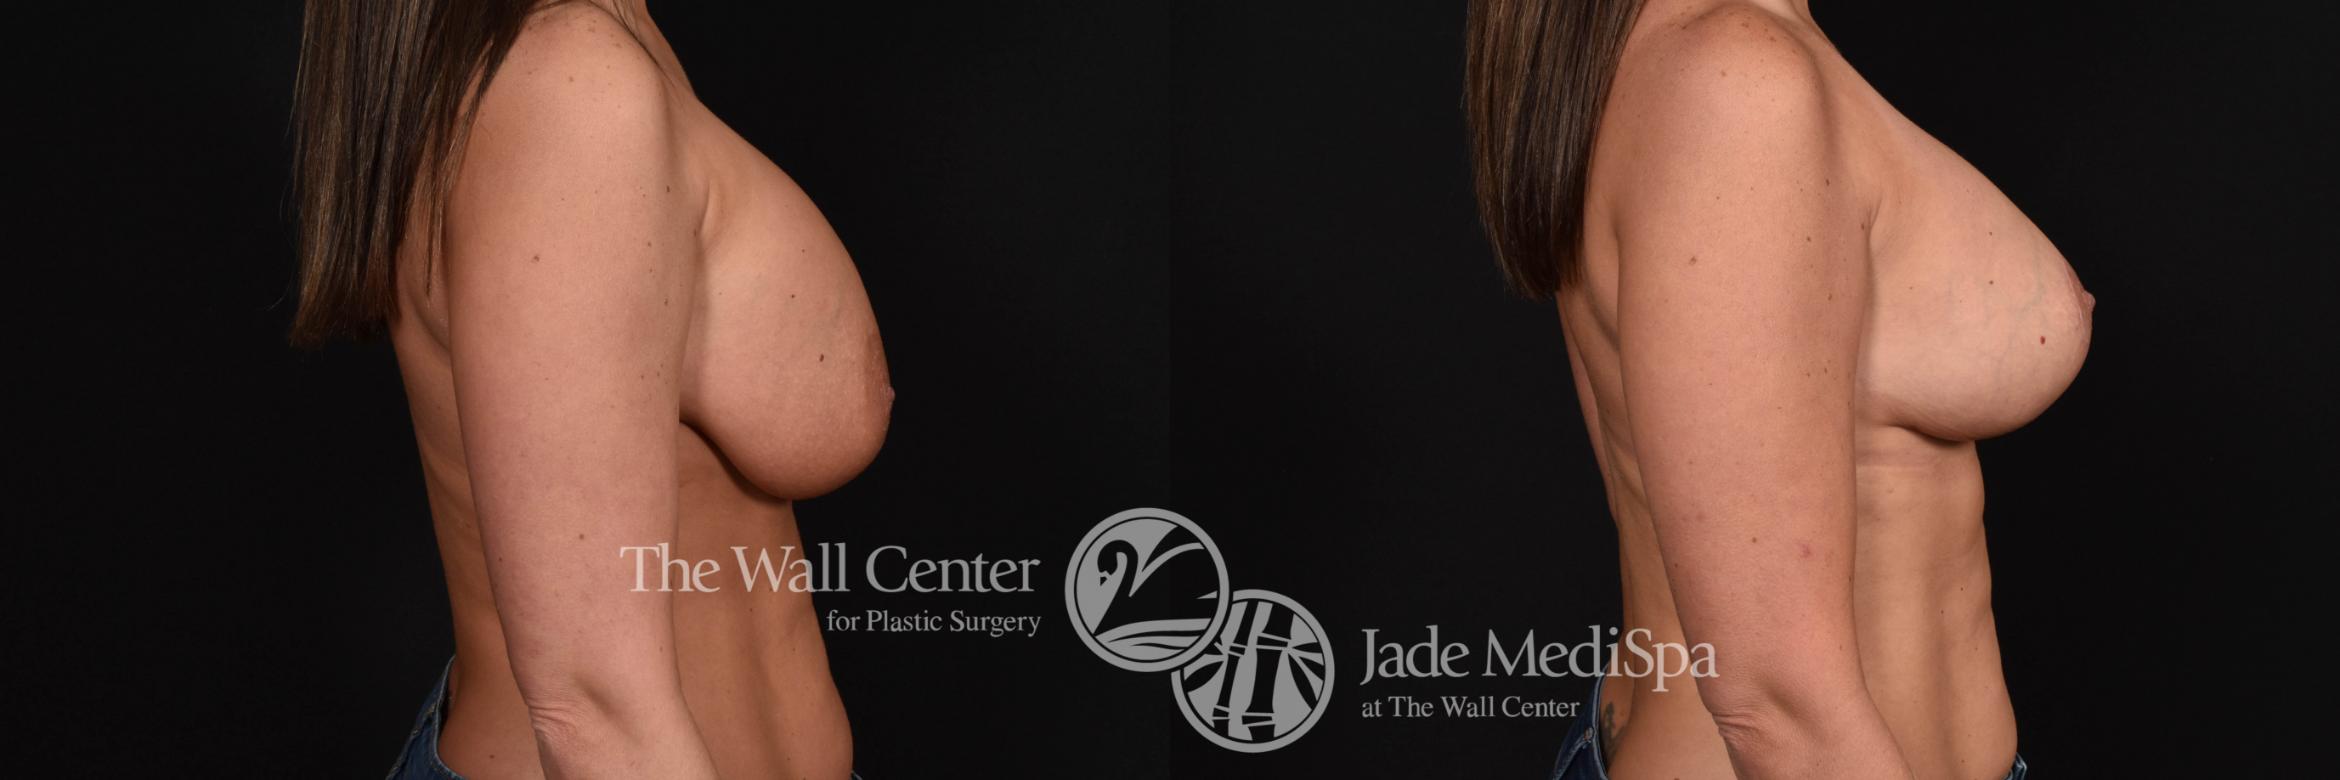 Breast Implant Exchange Right Side Photo, Shreveport, Louisiana, The Wall Center for Plastic Surgery, Case 884